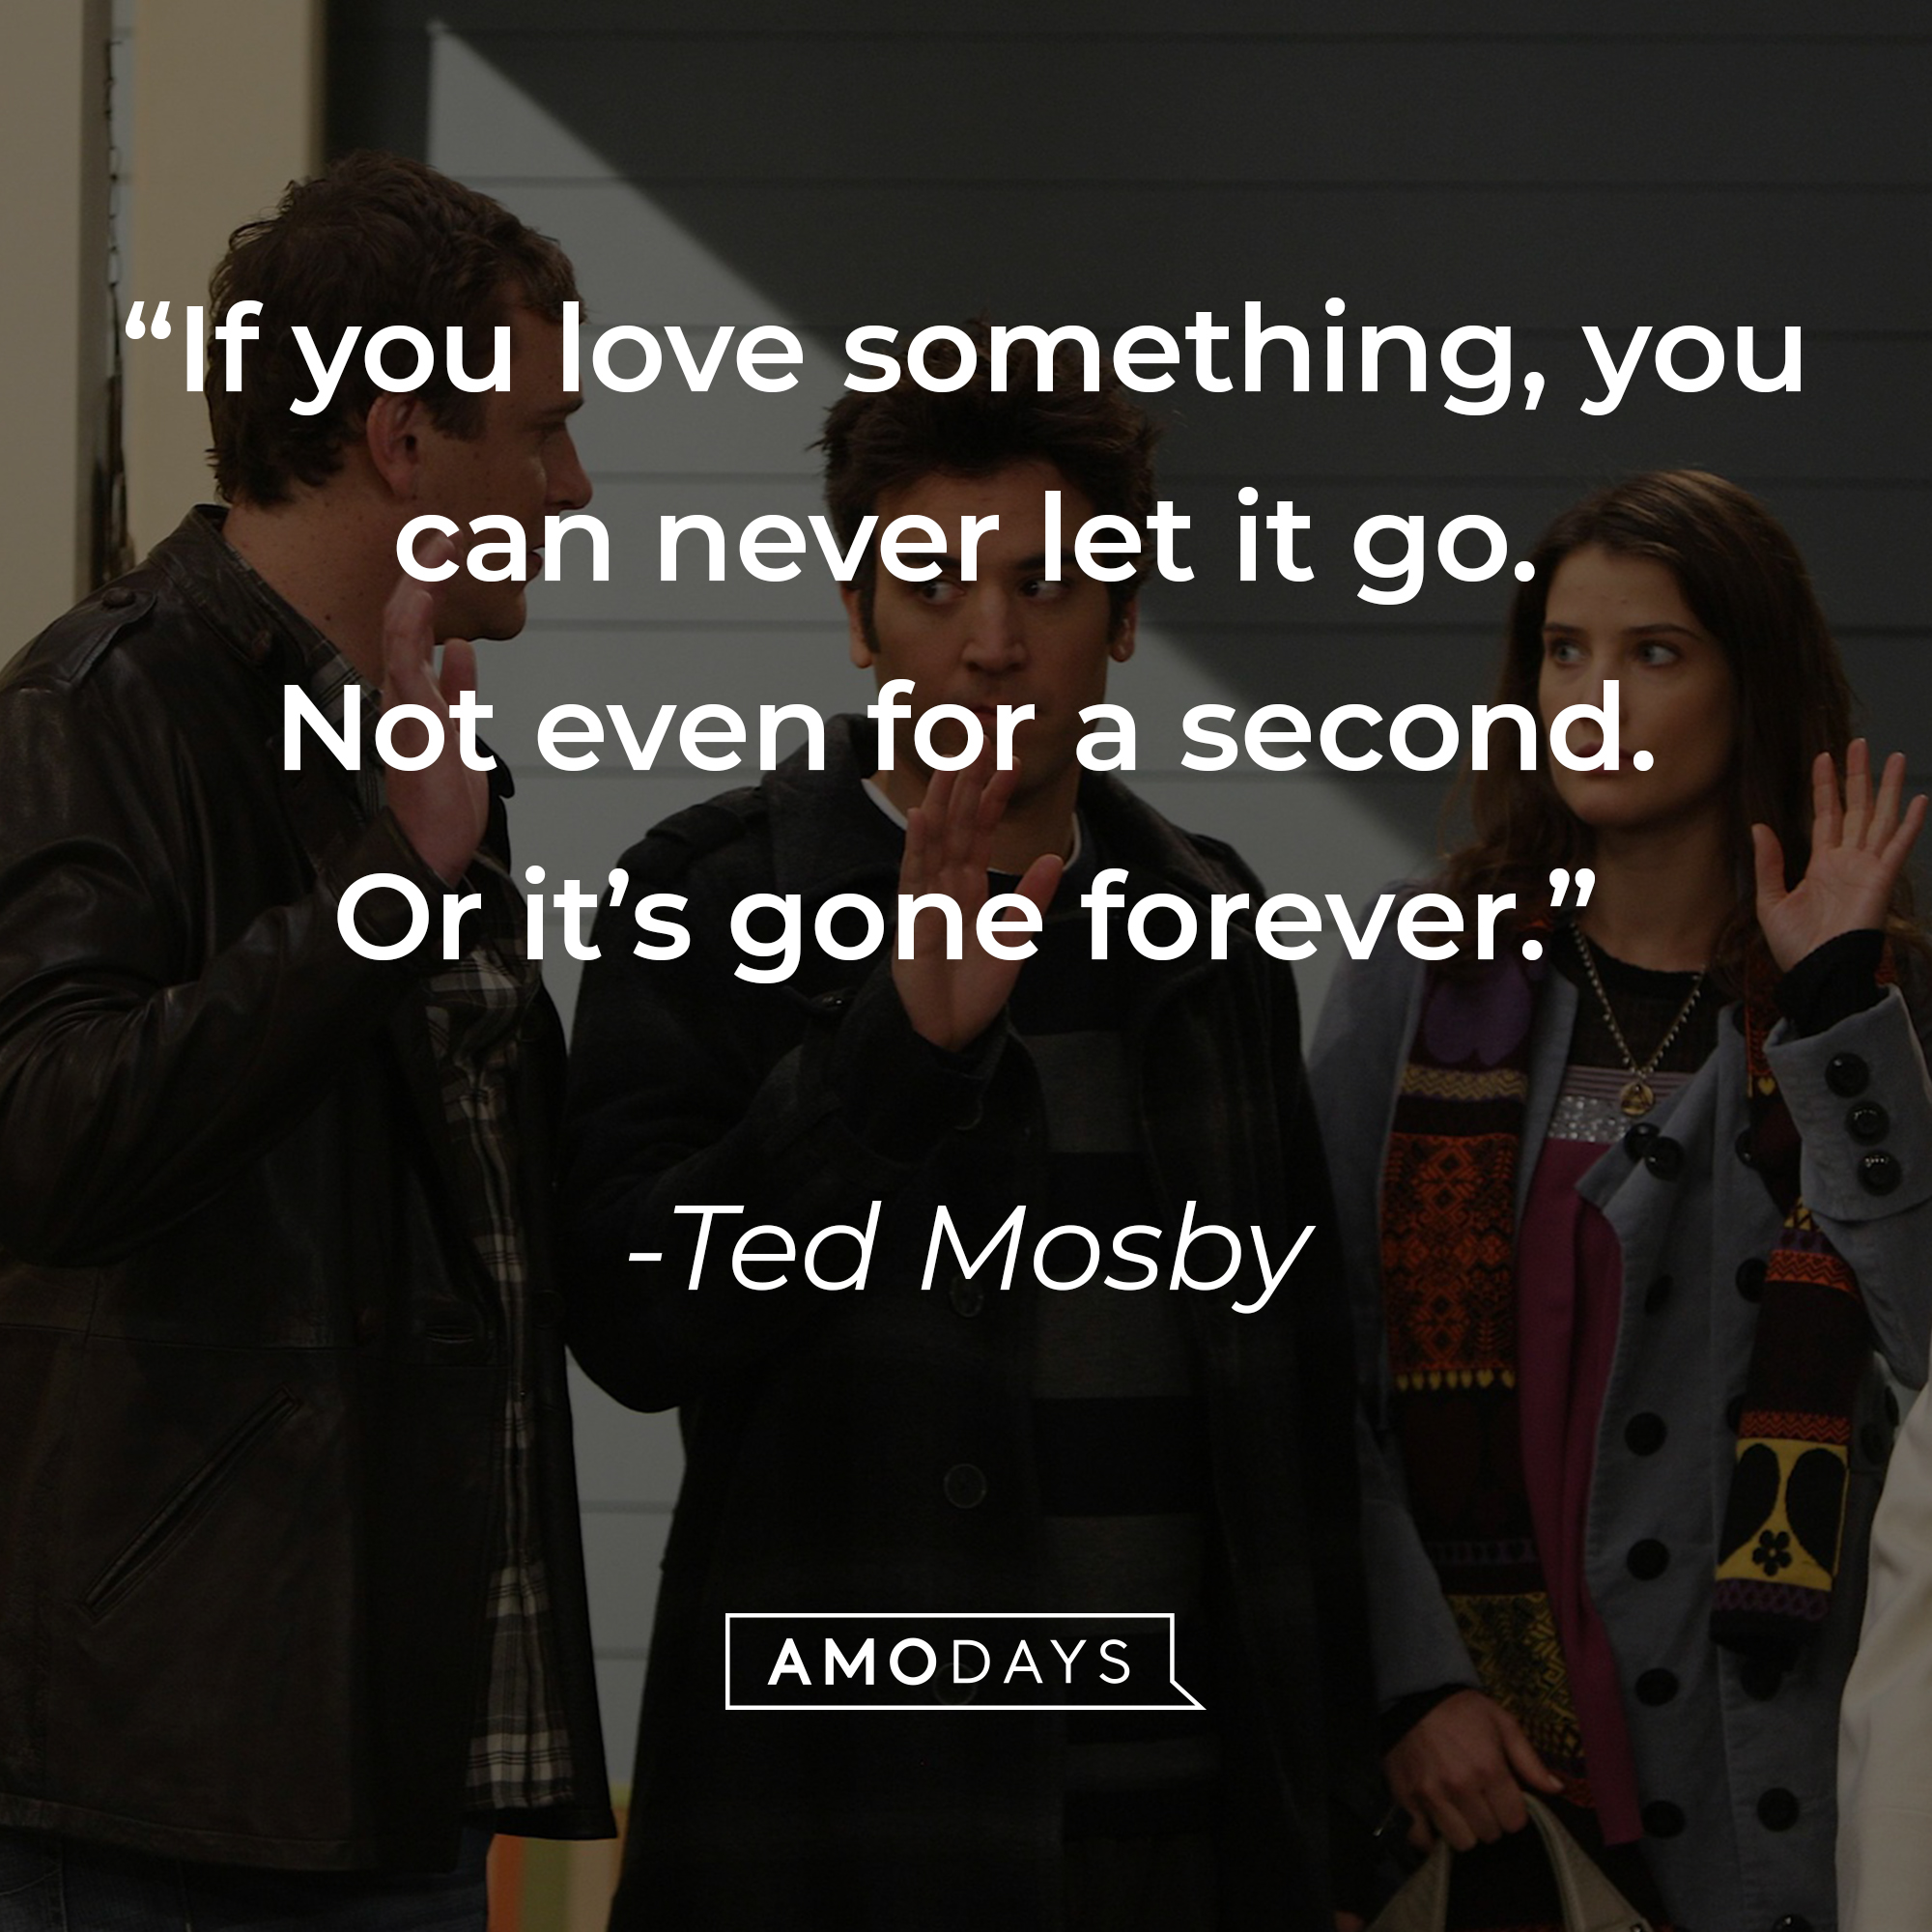 Ted Mosby's quote: "If you love something, you can never let it go. Not even for a second. Or it’s gone forever.” | Source: facebook.com/OfficialHowIMetYourMother